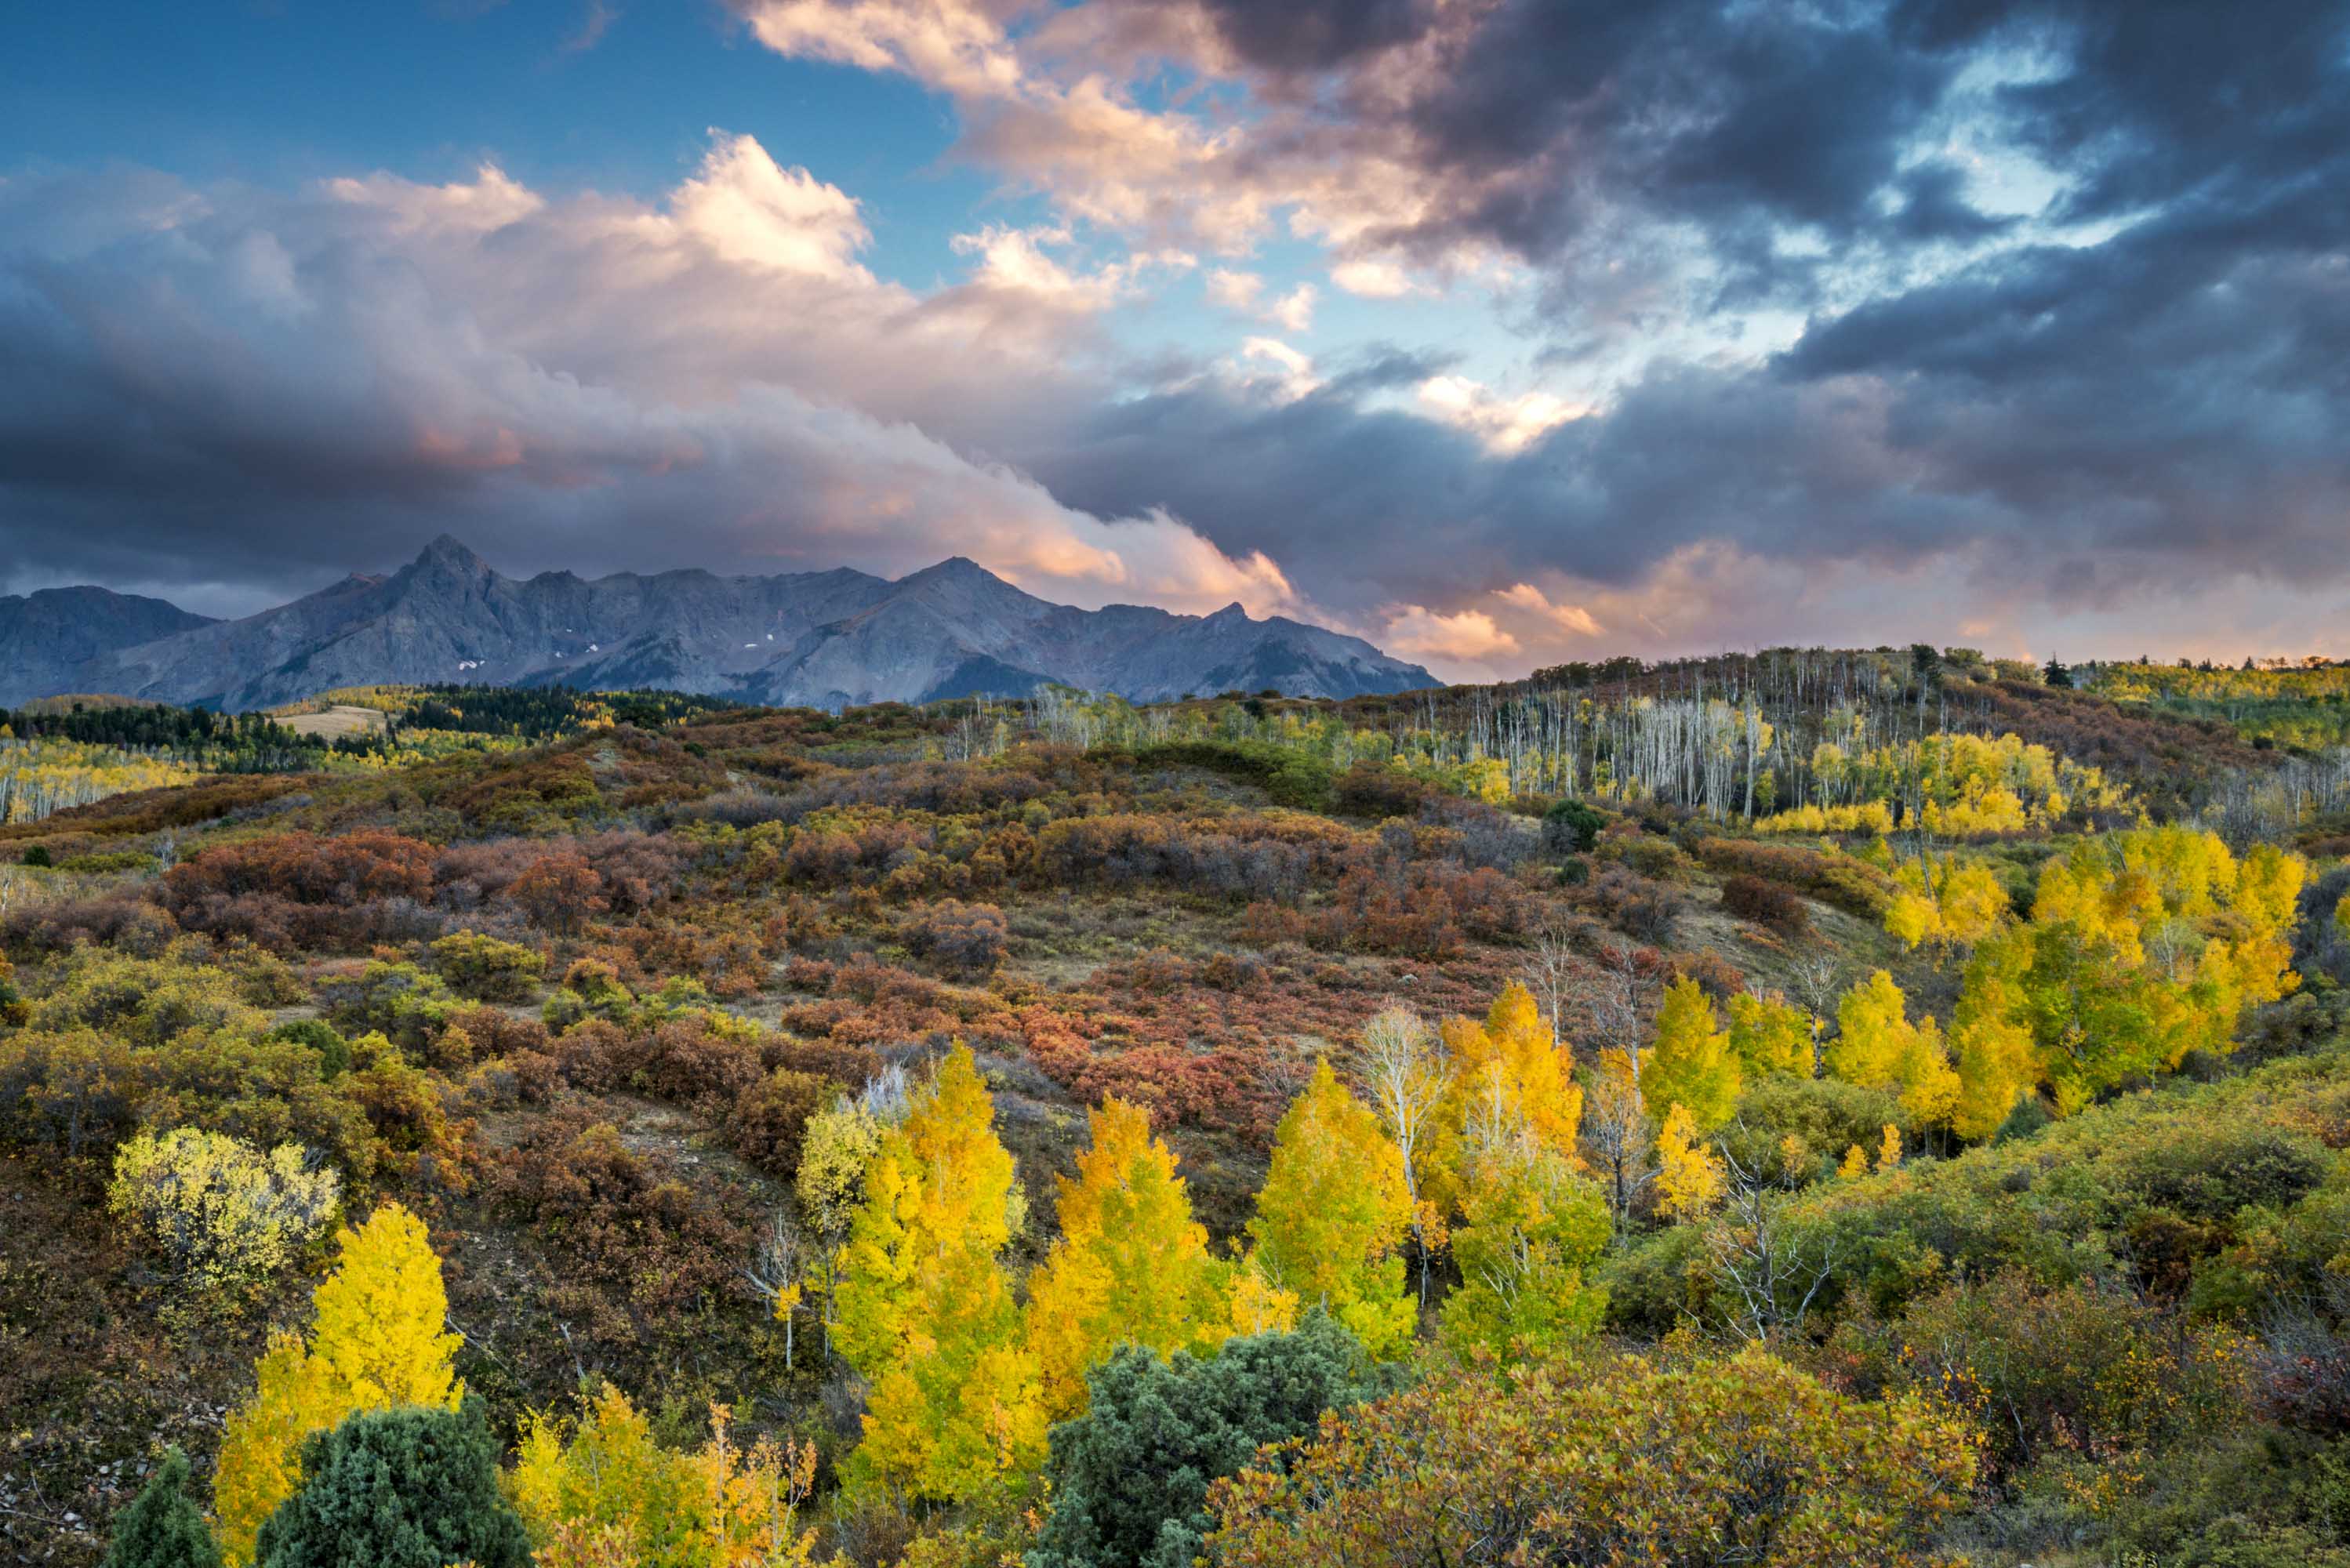 Fall foliage in the Sneffels Range viewed from Dallas Divide, Colorado.